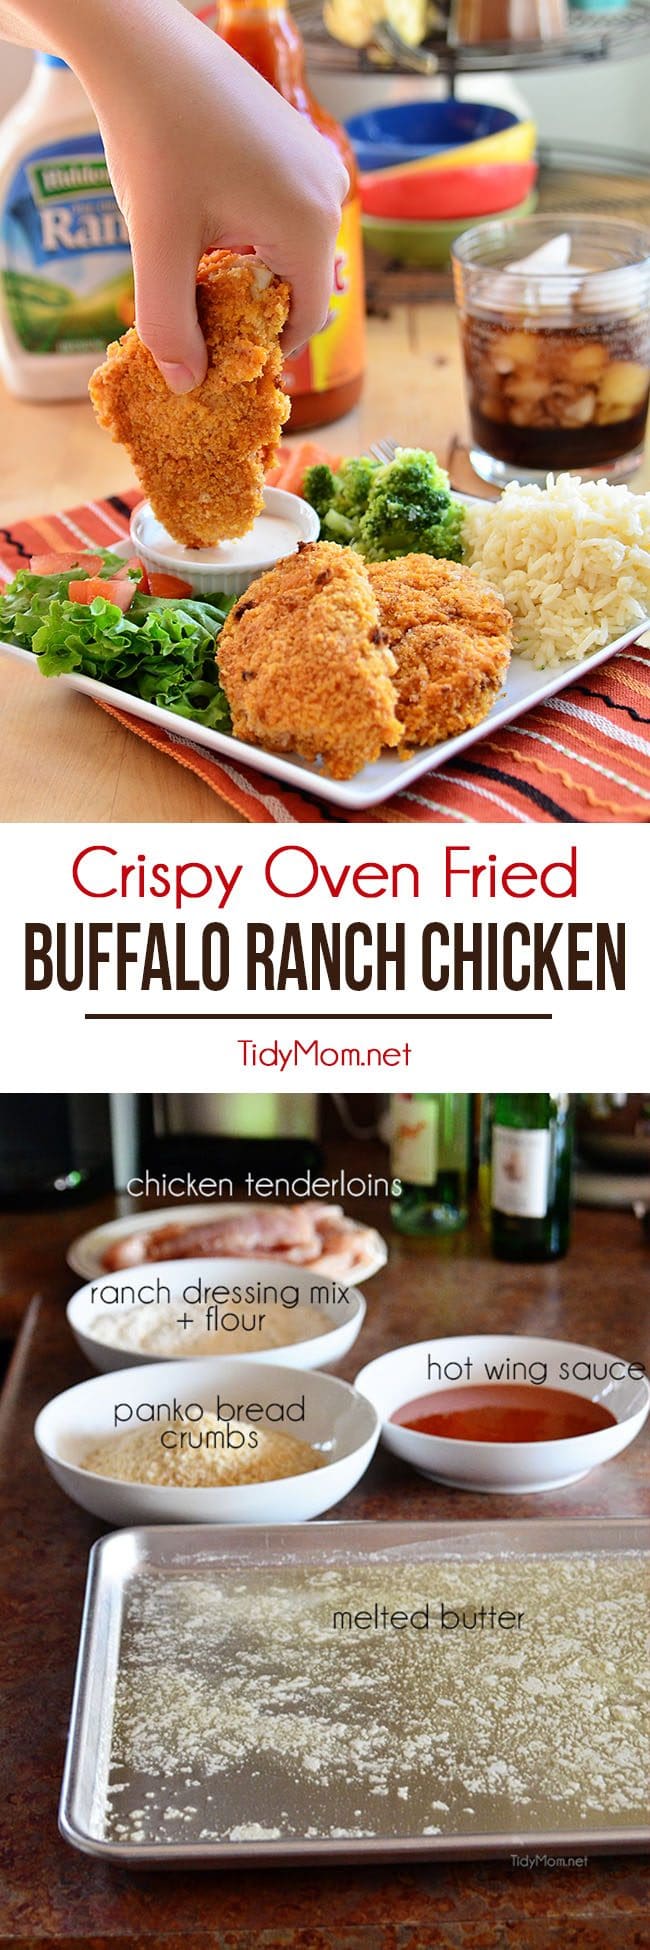 These crispy oven fried Buffalo Ranch Chicken strips are crisp-crusted moist and tender fiery buffalo sauce slathered where's the ranch dip chicken fingers. Get the recipe at TidyMom.net